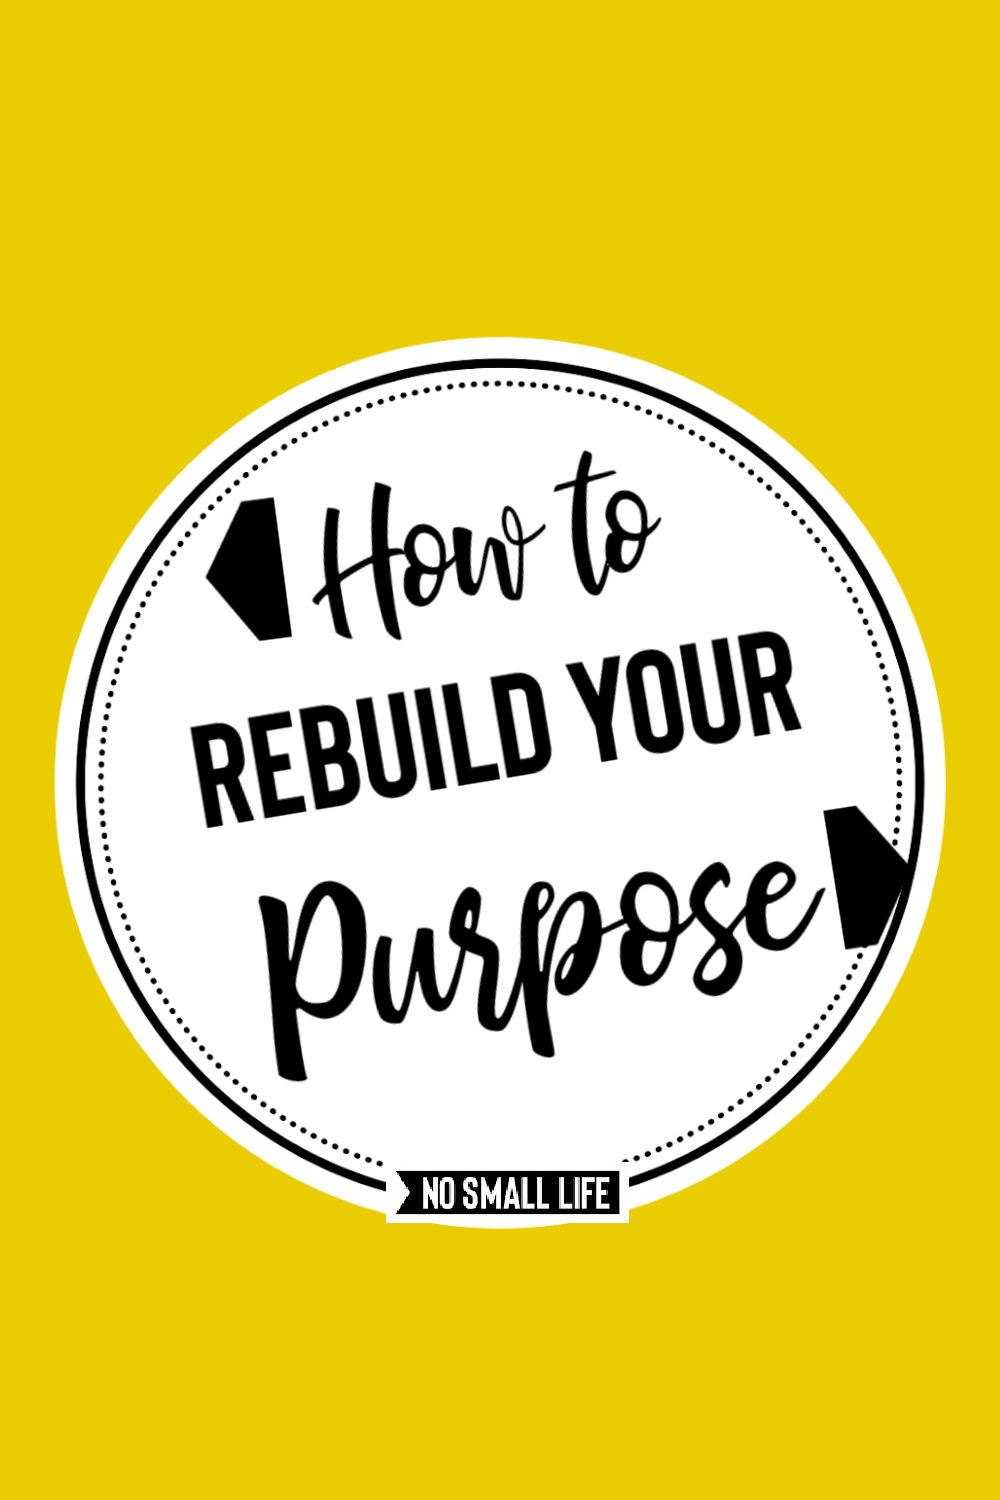 How to Rebuild your Purpose